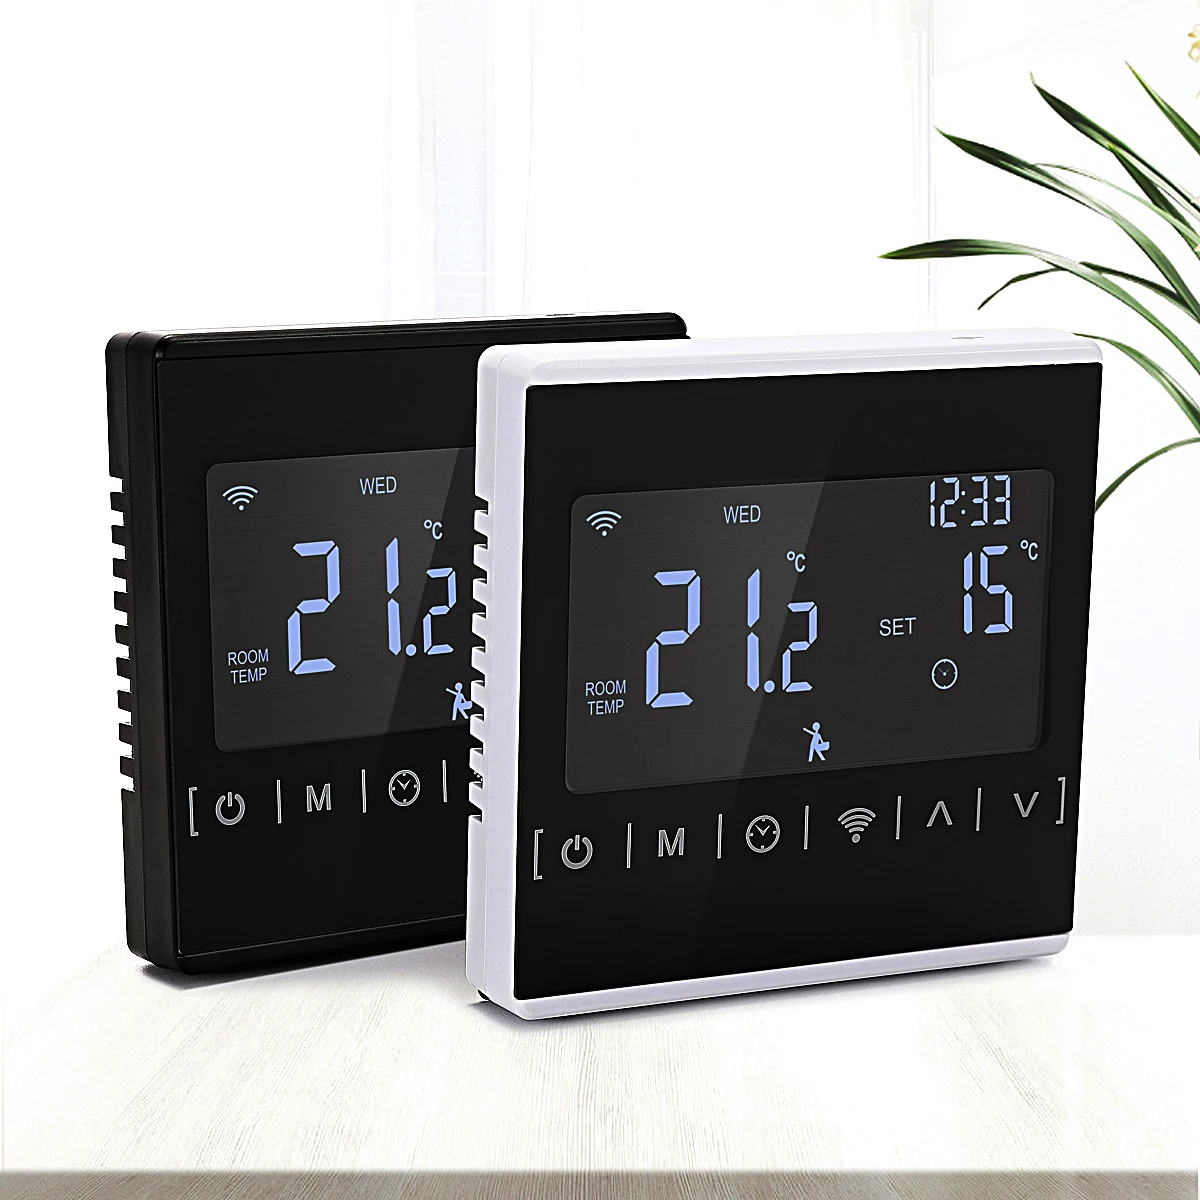 

WiFi Smart Thermostat Temperature Controller for gas boiler electric underfloor heating humidity display works with Alexa